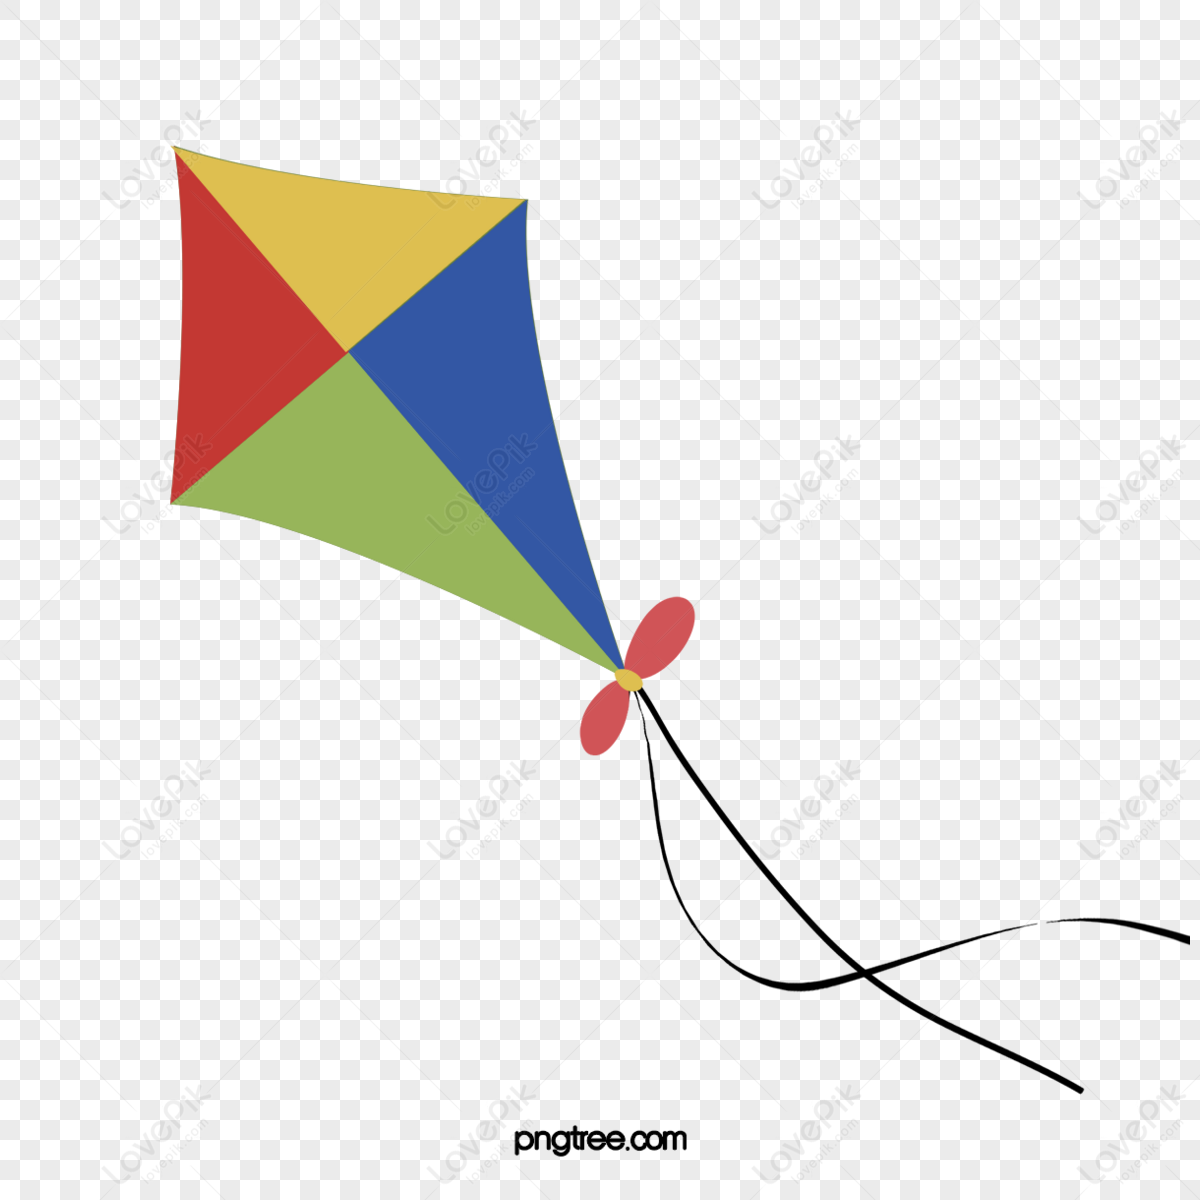 Kite Doodle Vector Art, Icons, and Graphics for Free Download